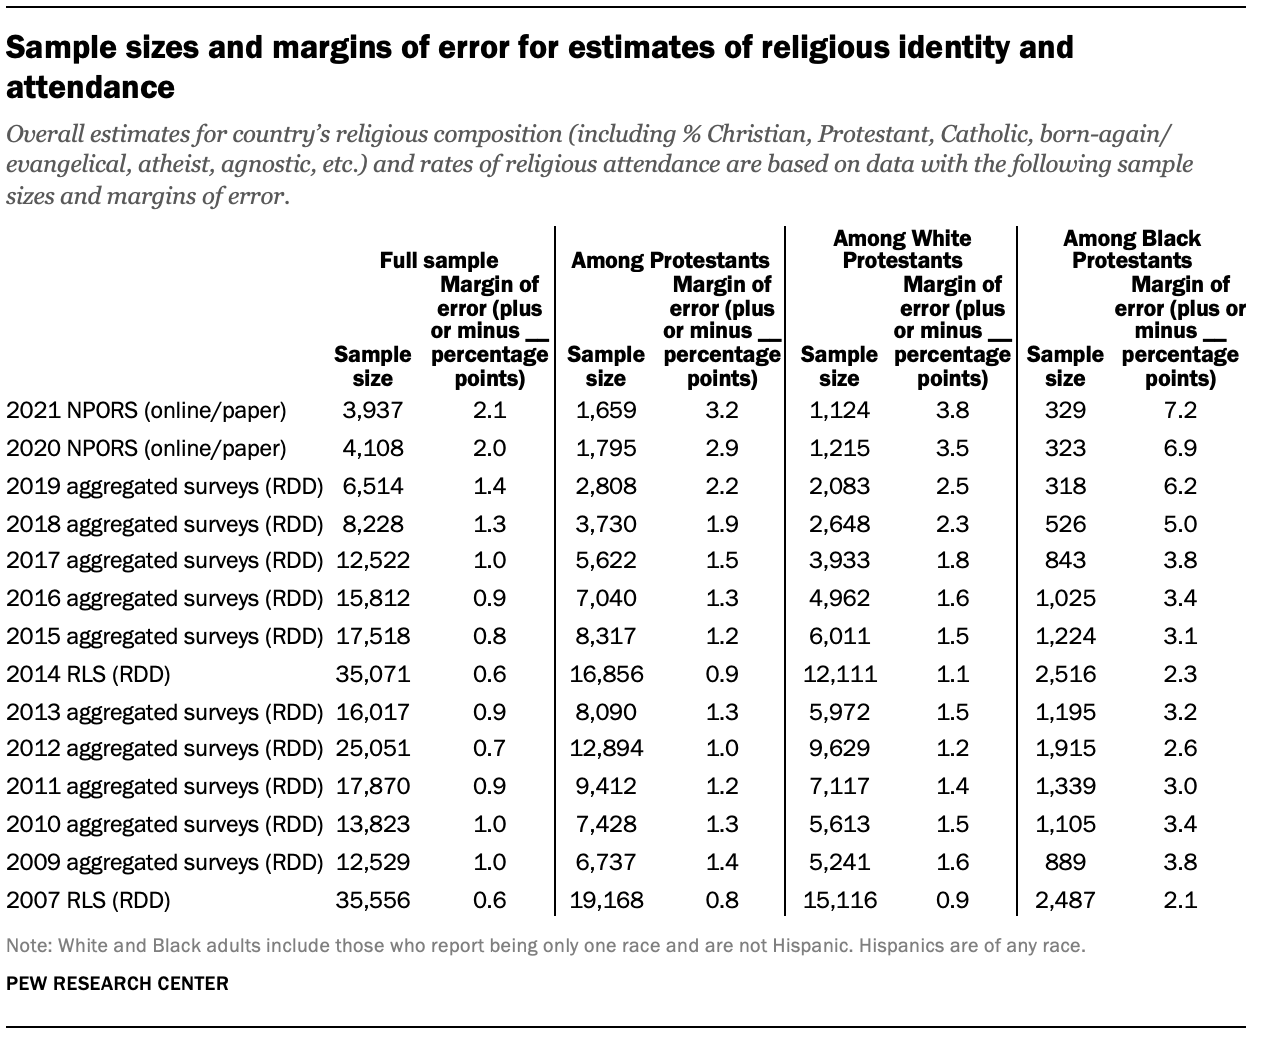 Sample sizes and margins of error for estimates of religious identity and attendance